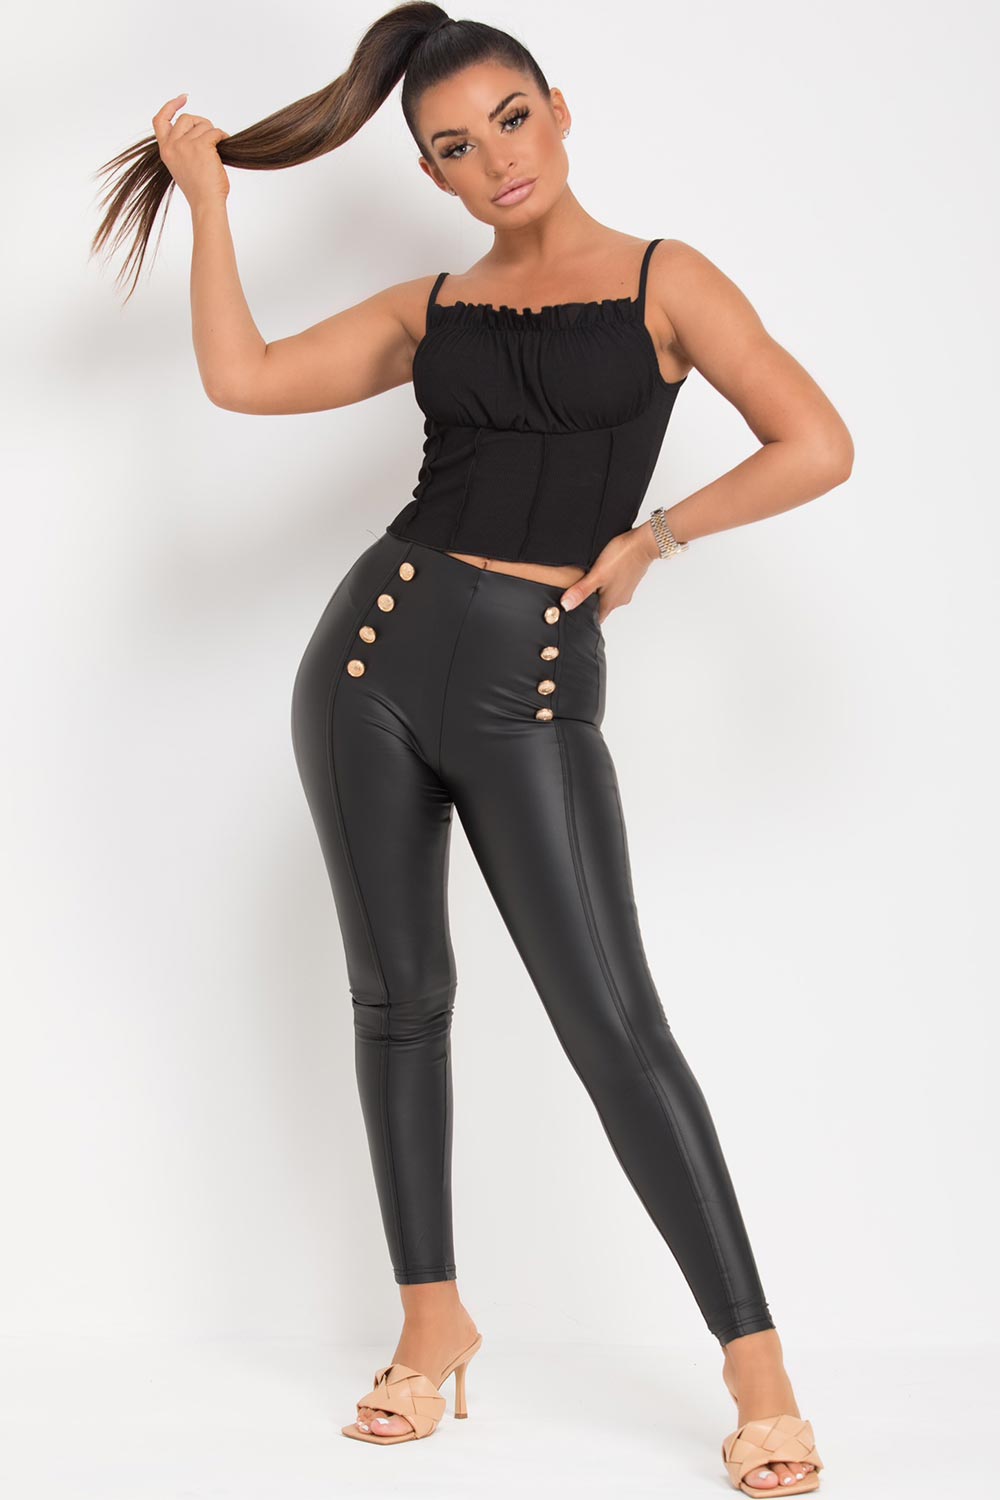 Black Faux Leather High Waist Leggings With Gold Buttons Vegan Friendly –